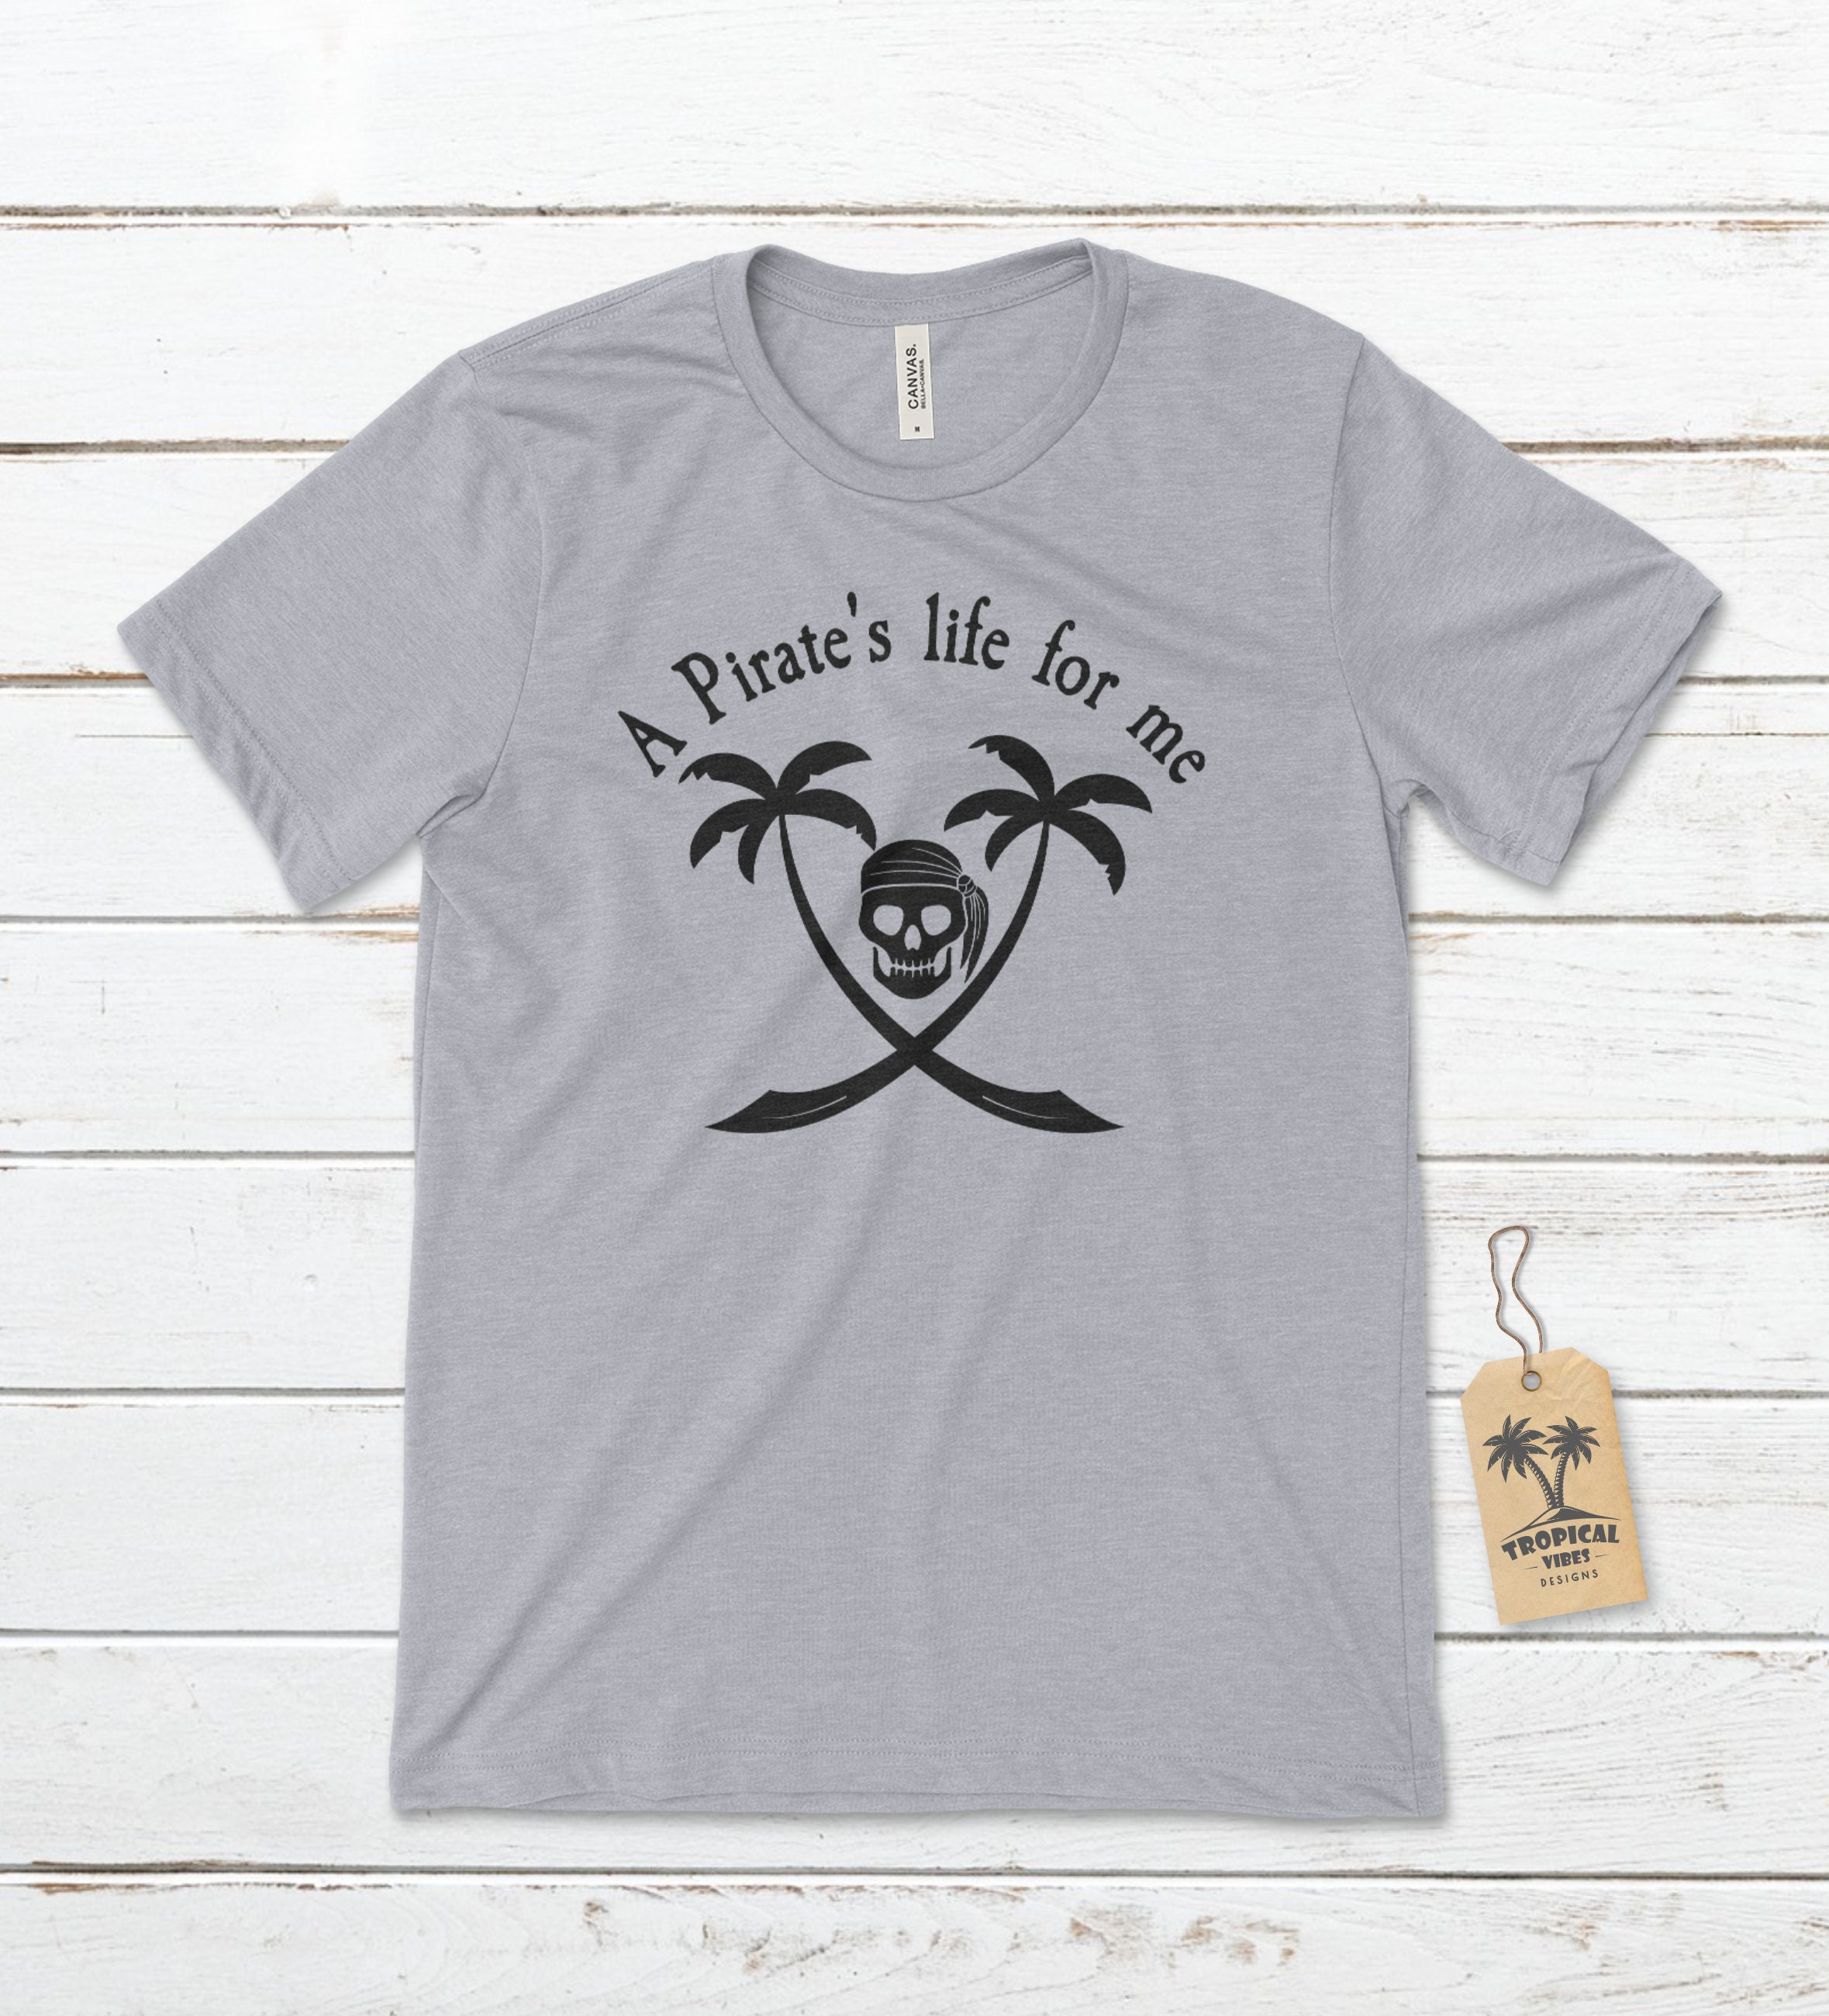 KokomoRoad A Pirate's Life for Me Unisex T-Shirt, Pirate T-Shirt, Jolly Roger T-Shirt, Pirate Gifts, Pirates of The Caribbean, Beachy Shirts